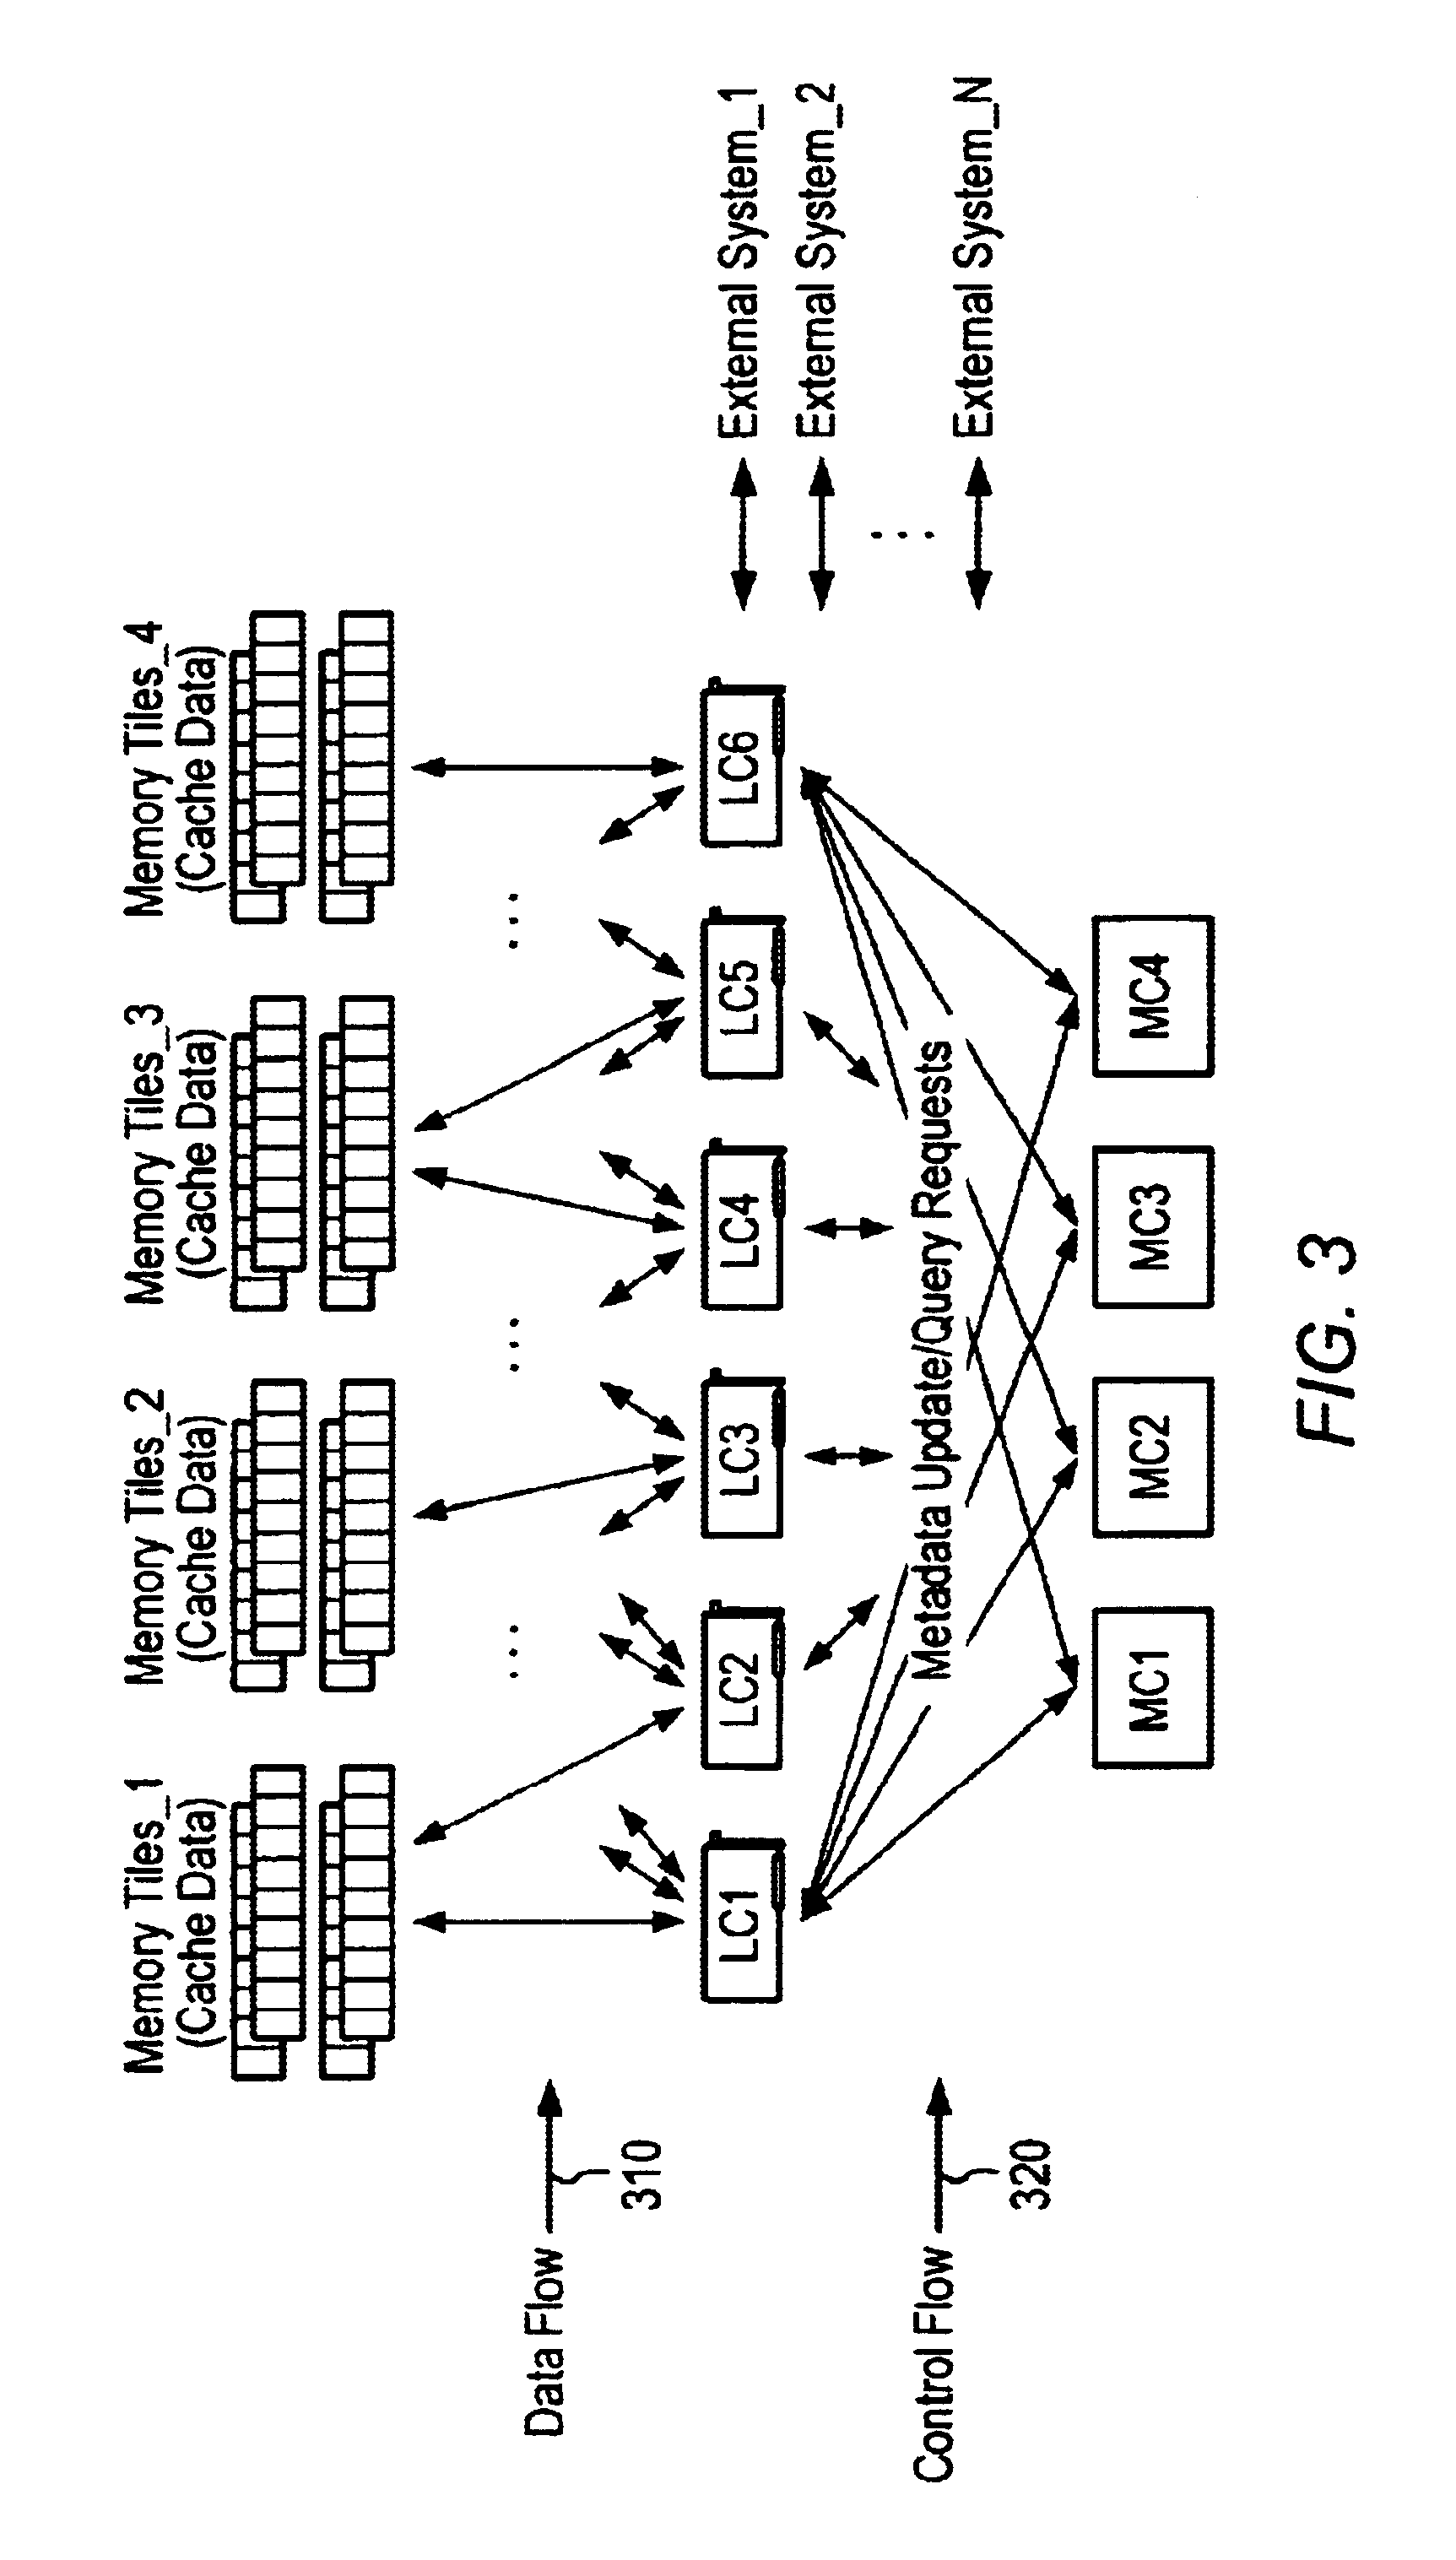 Data storage system using 3-party hand-off protocol to maintain a single coherent logical image